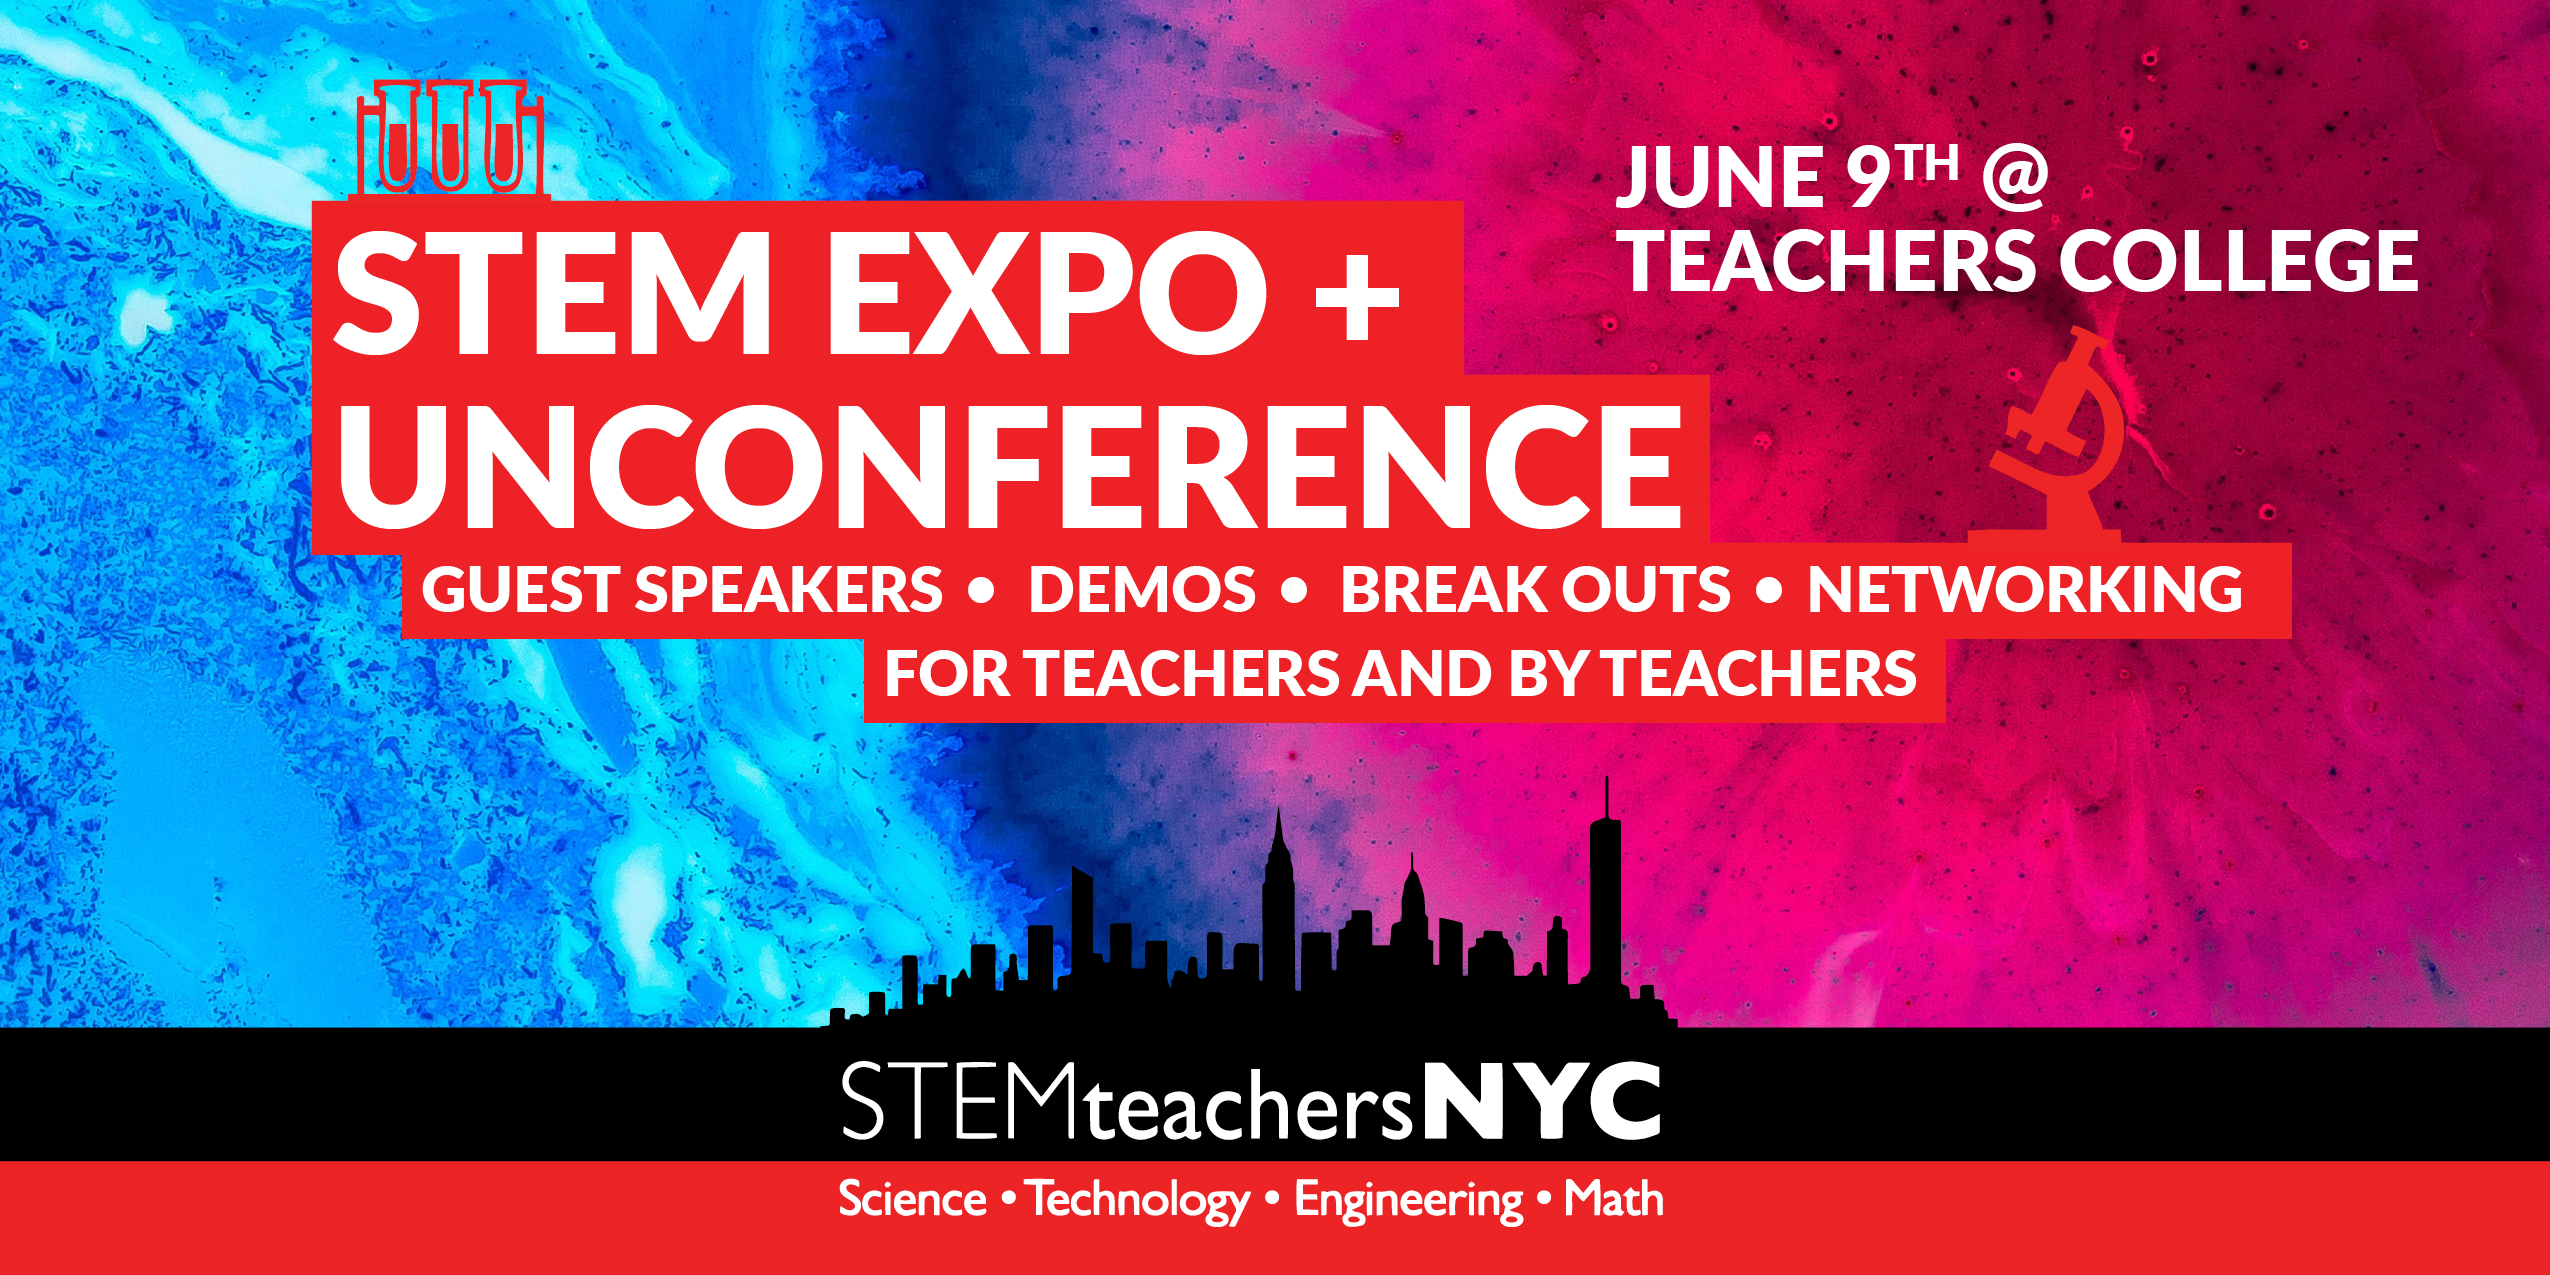 STEM Expo 2019 Speakers and Lineup!